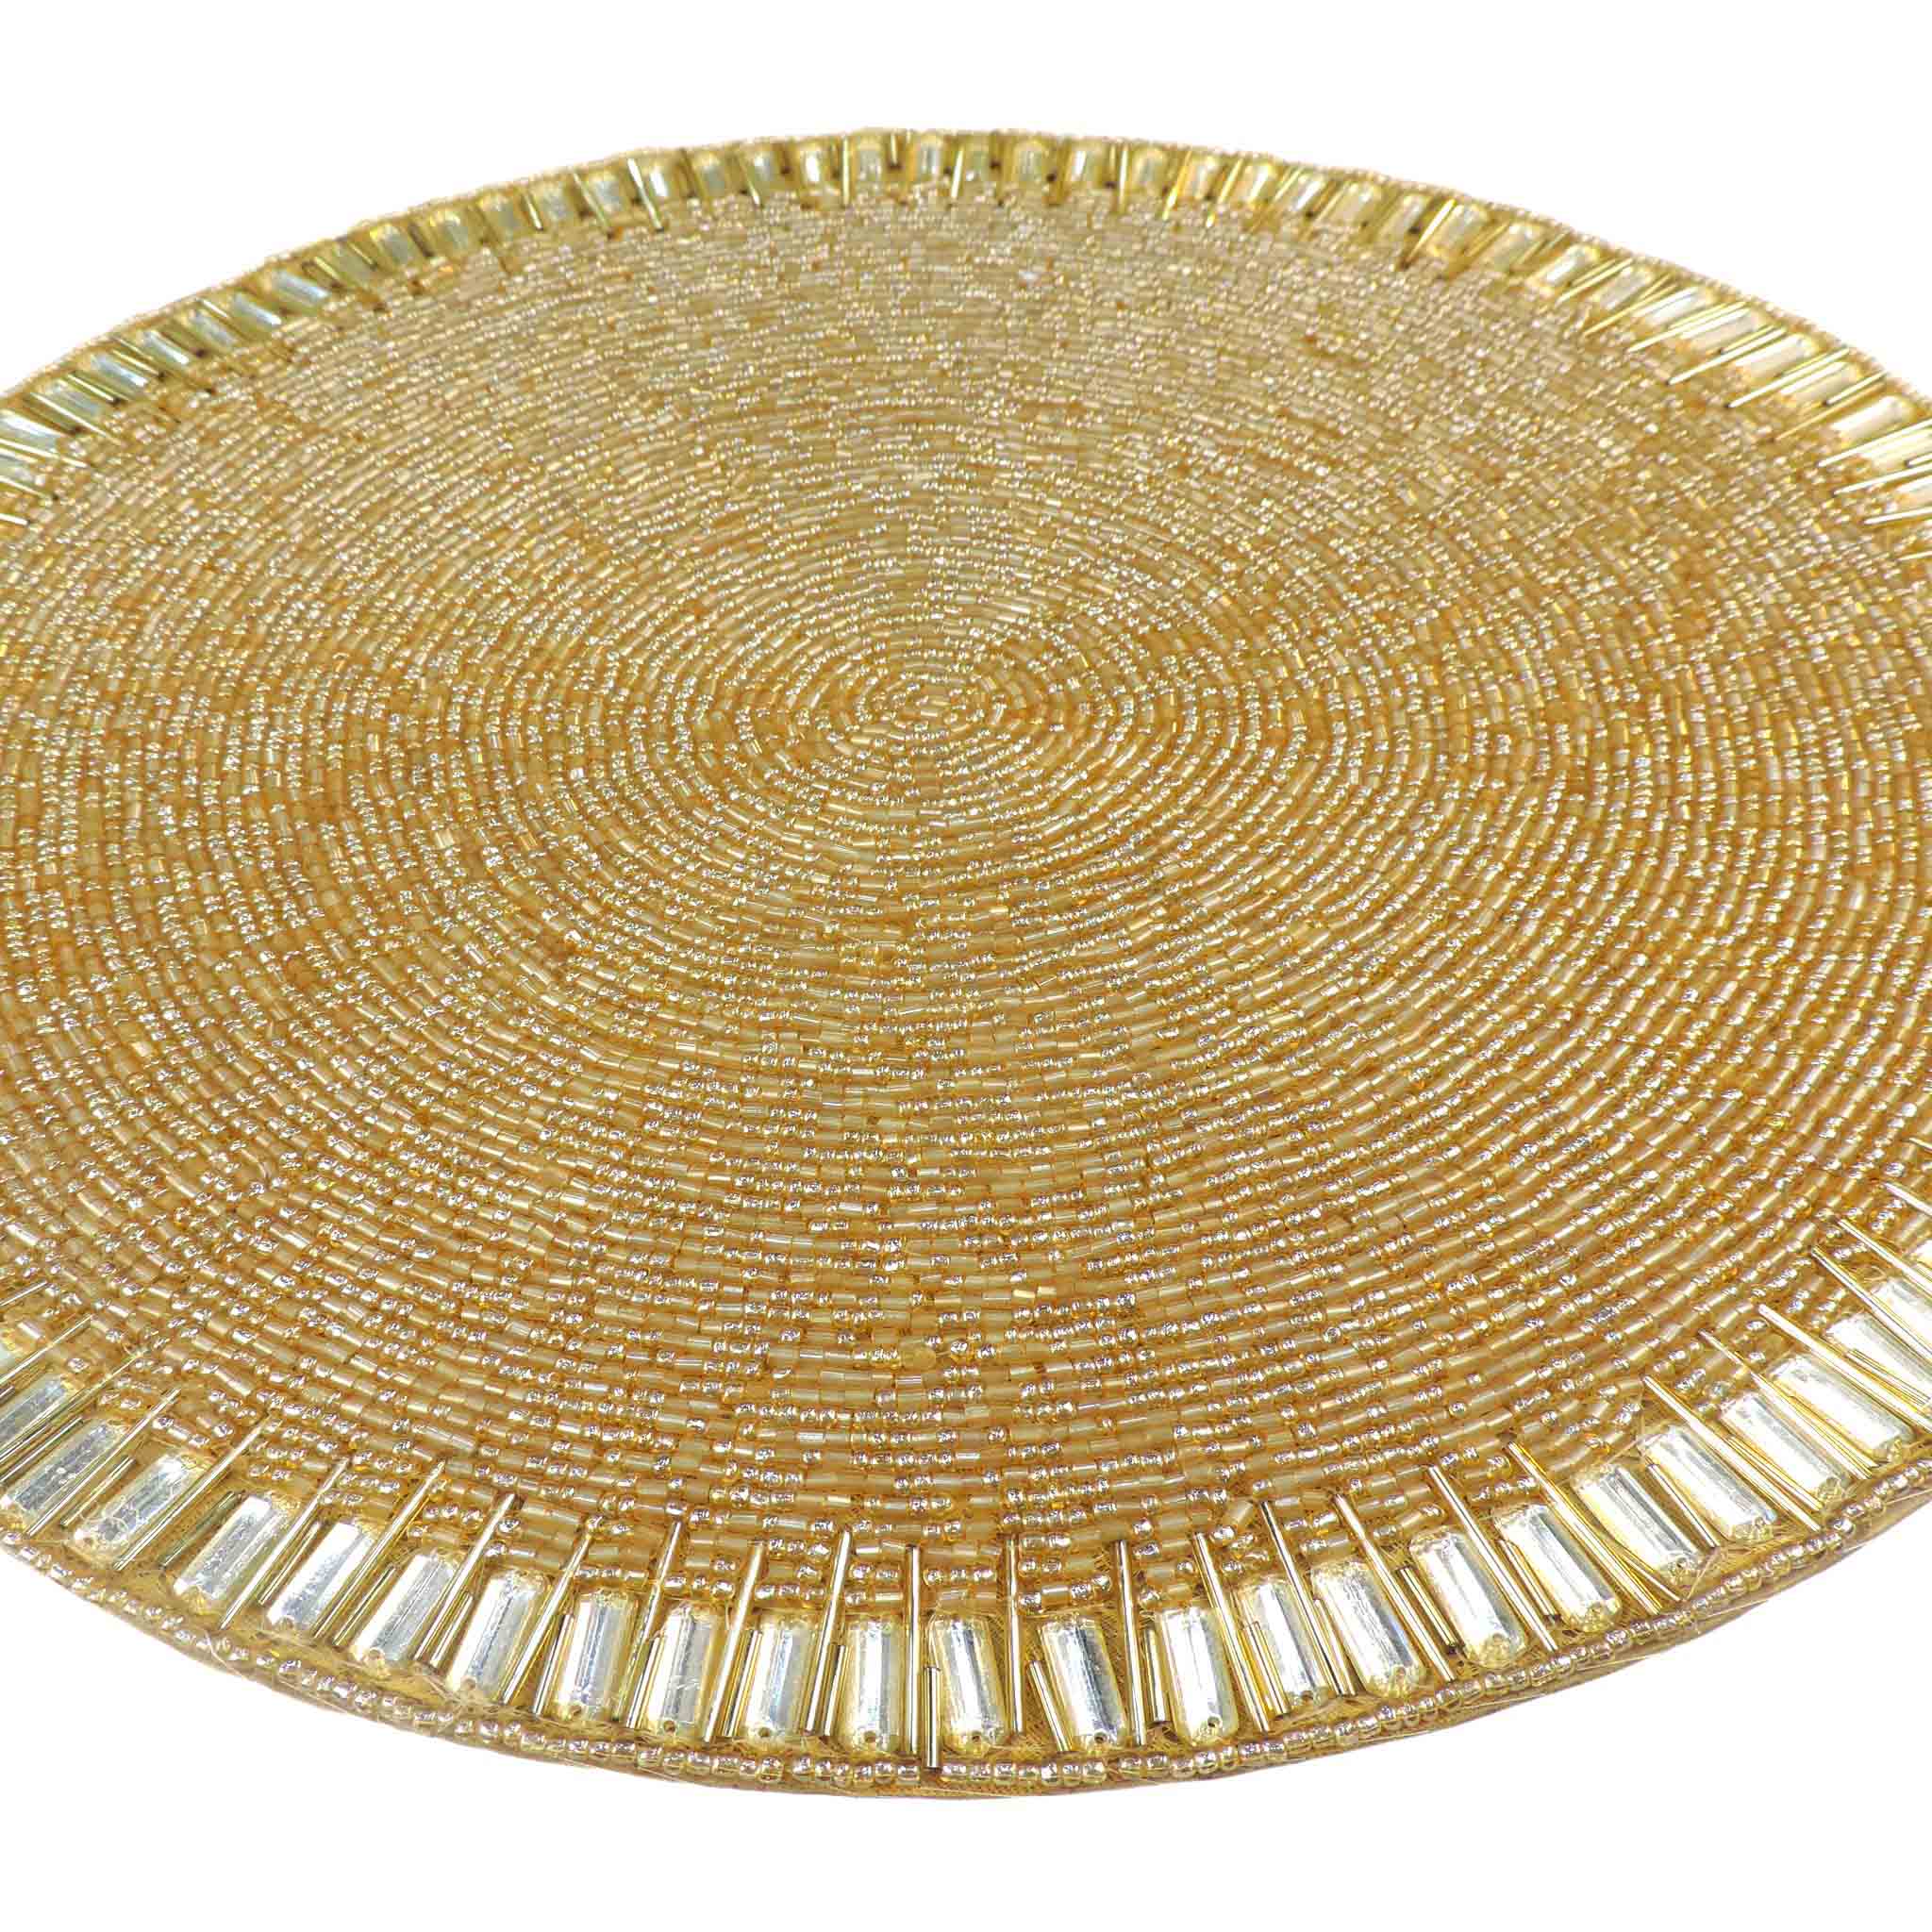 Glam Crystal Bead Embroidered Placemat in Gold, Set of 2/4